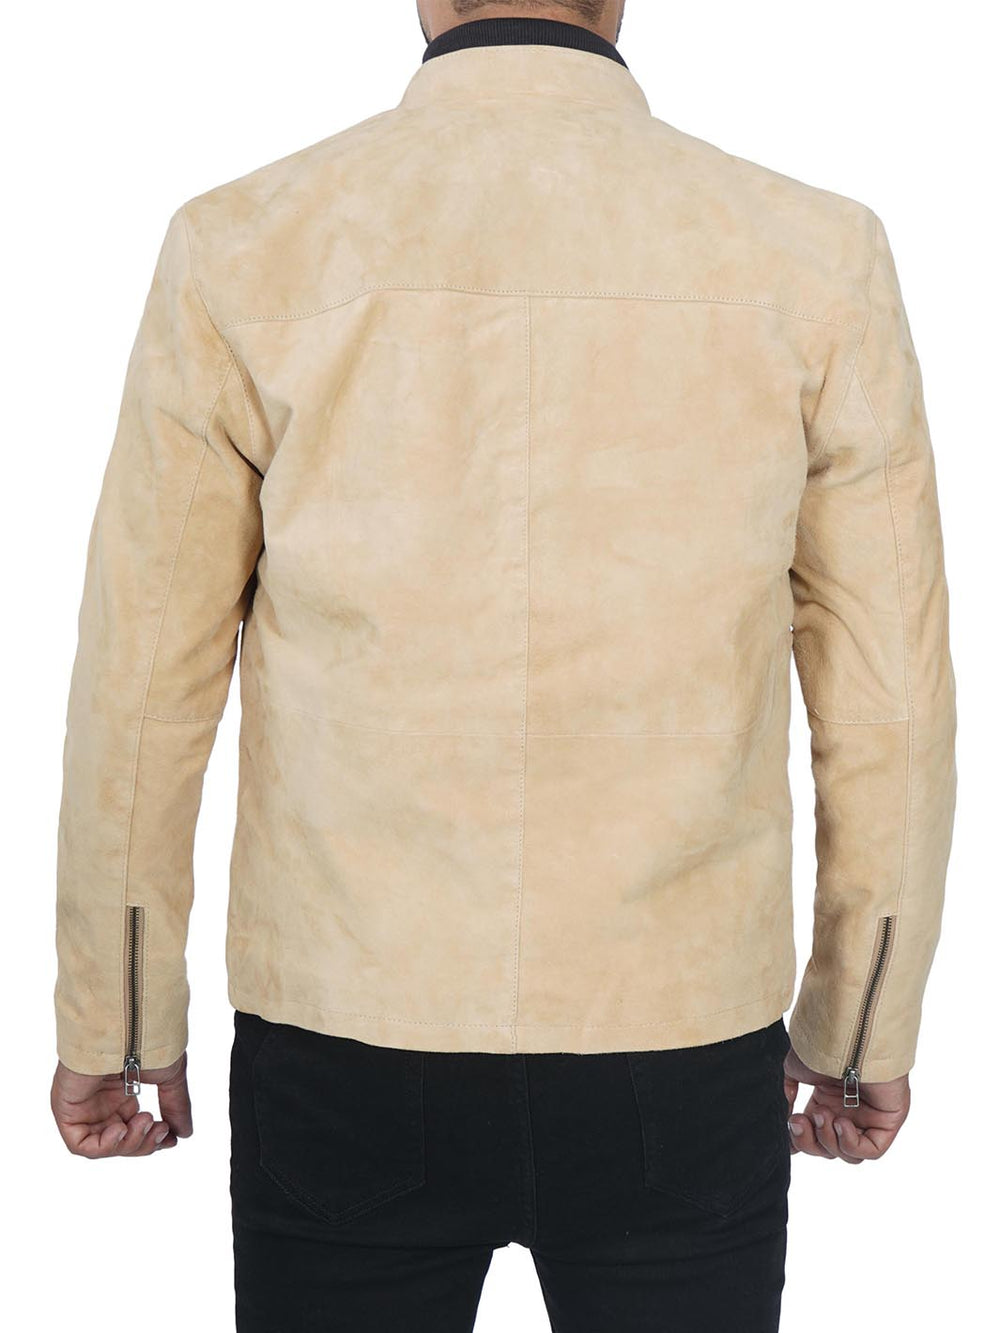 Morocco Mens Brown Suede Leather Jacket